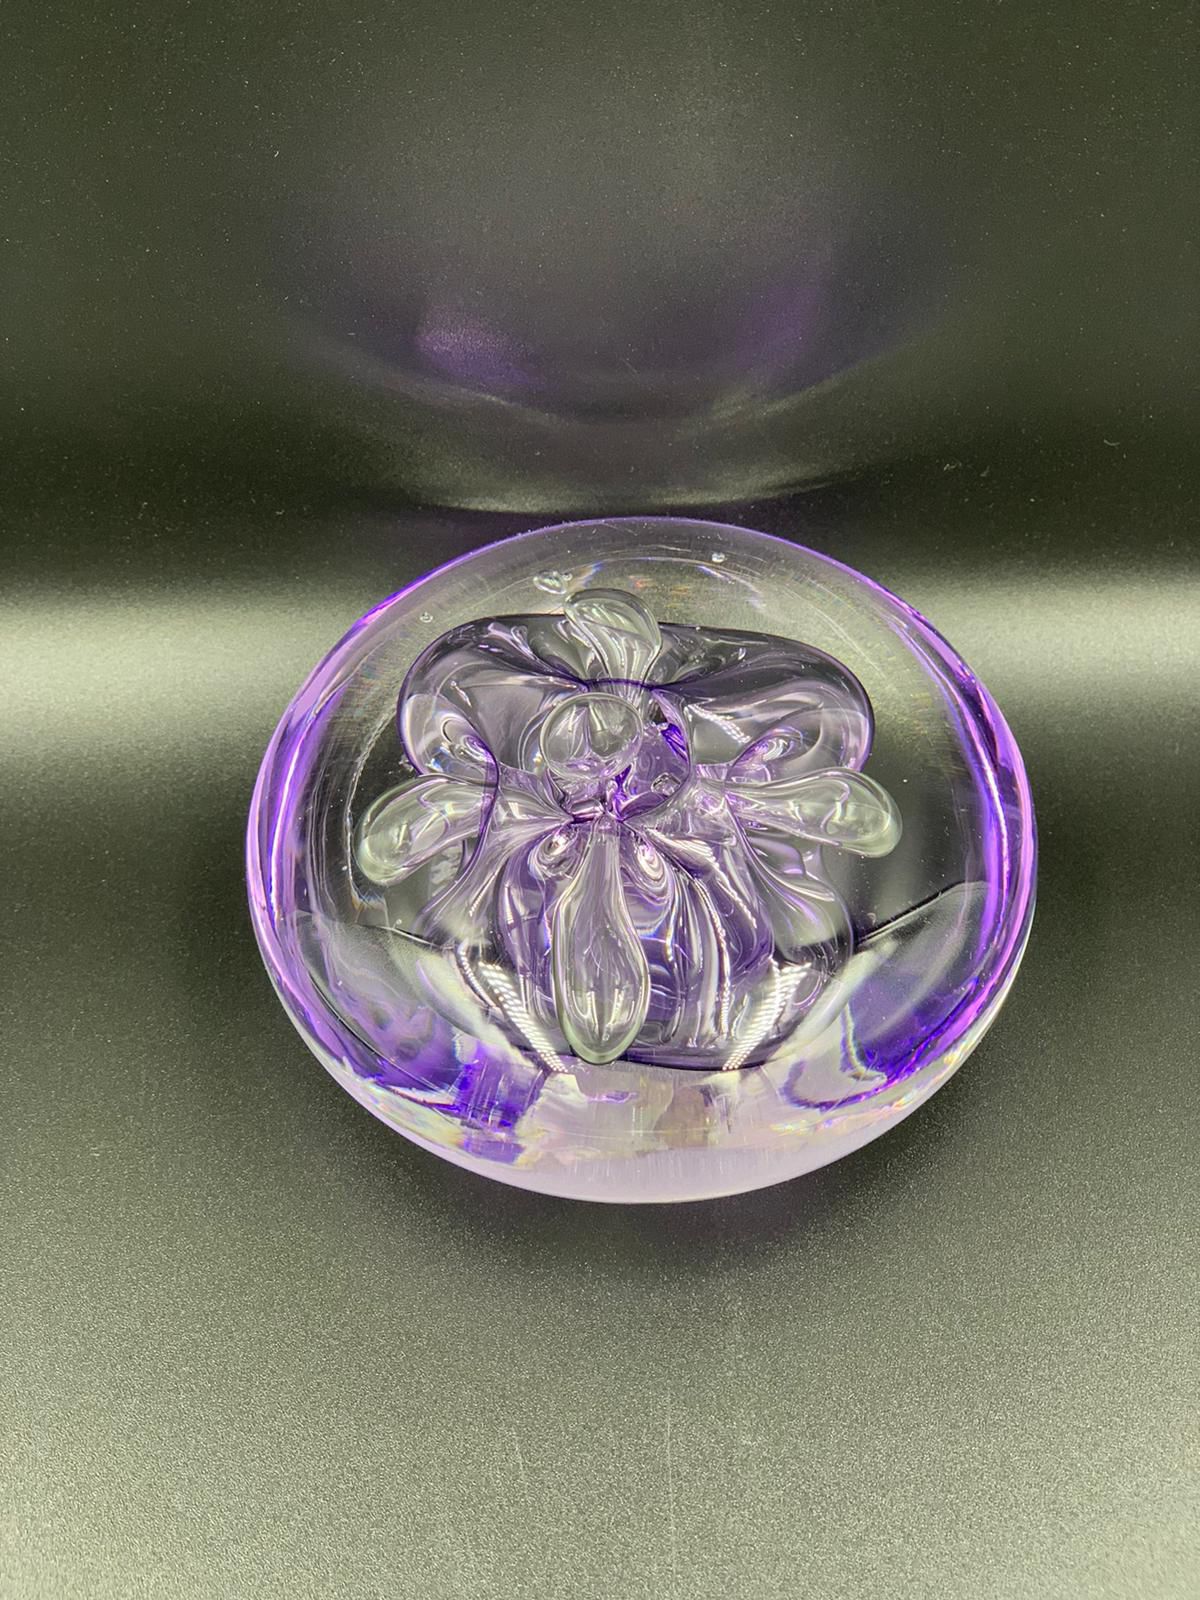 Rollin Karg Art Glass Paperweight, Purple with controlled bubble, signed.